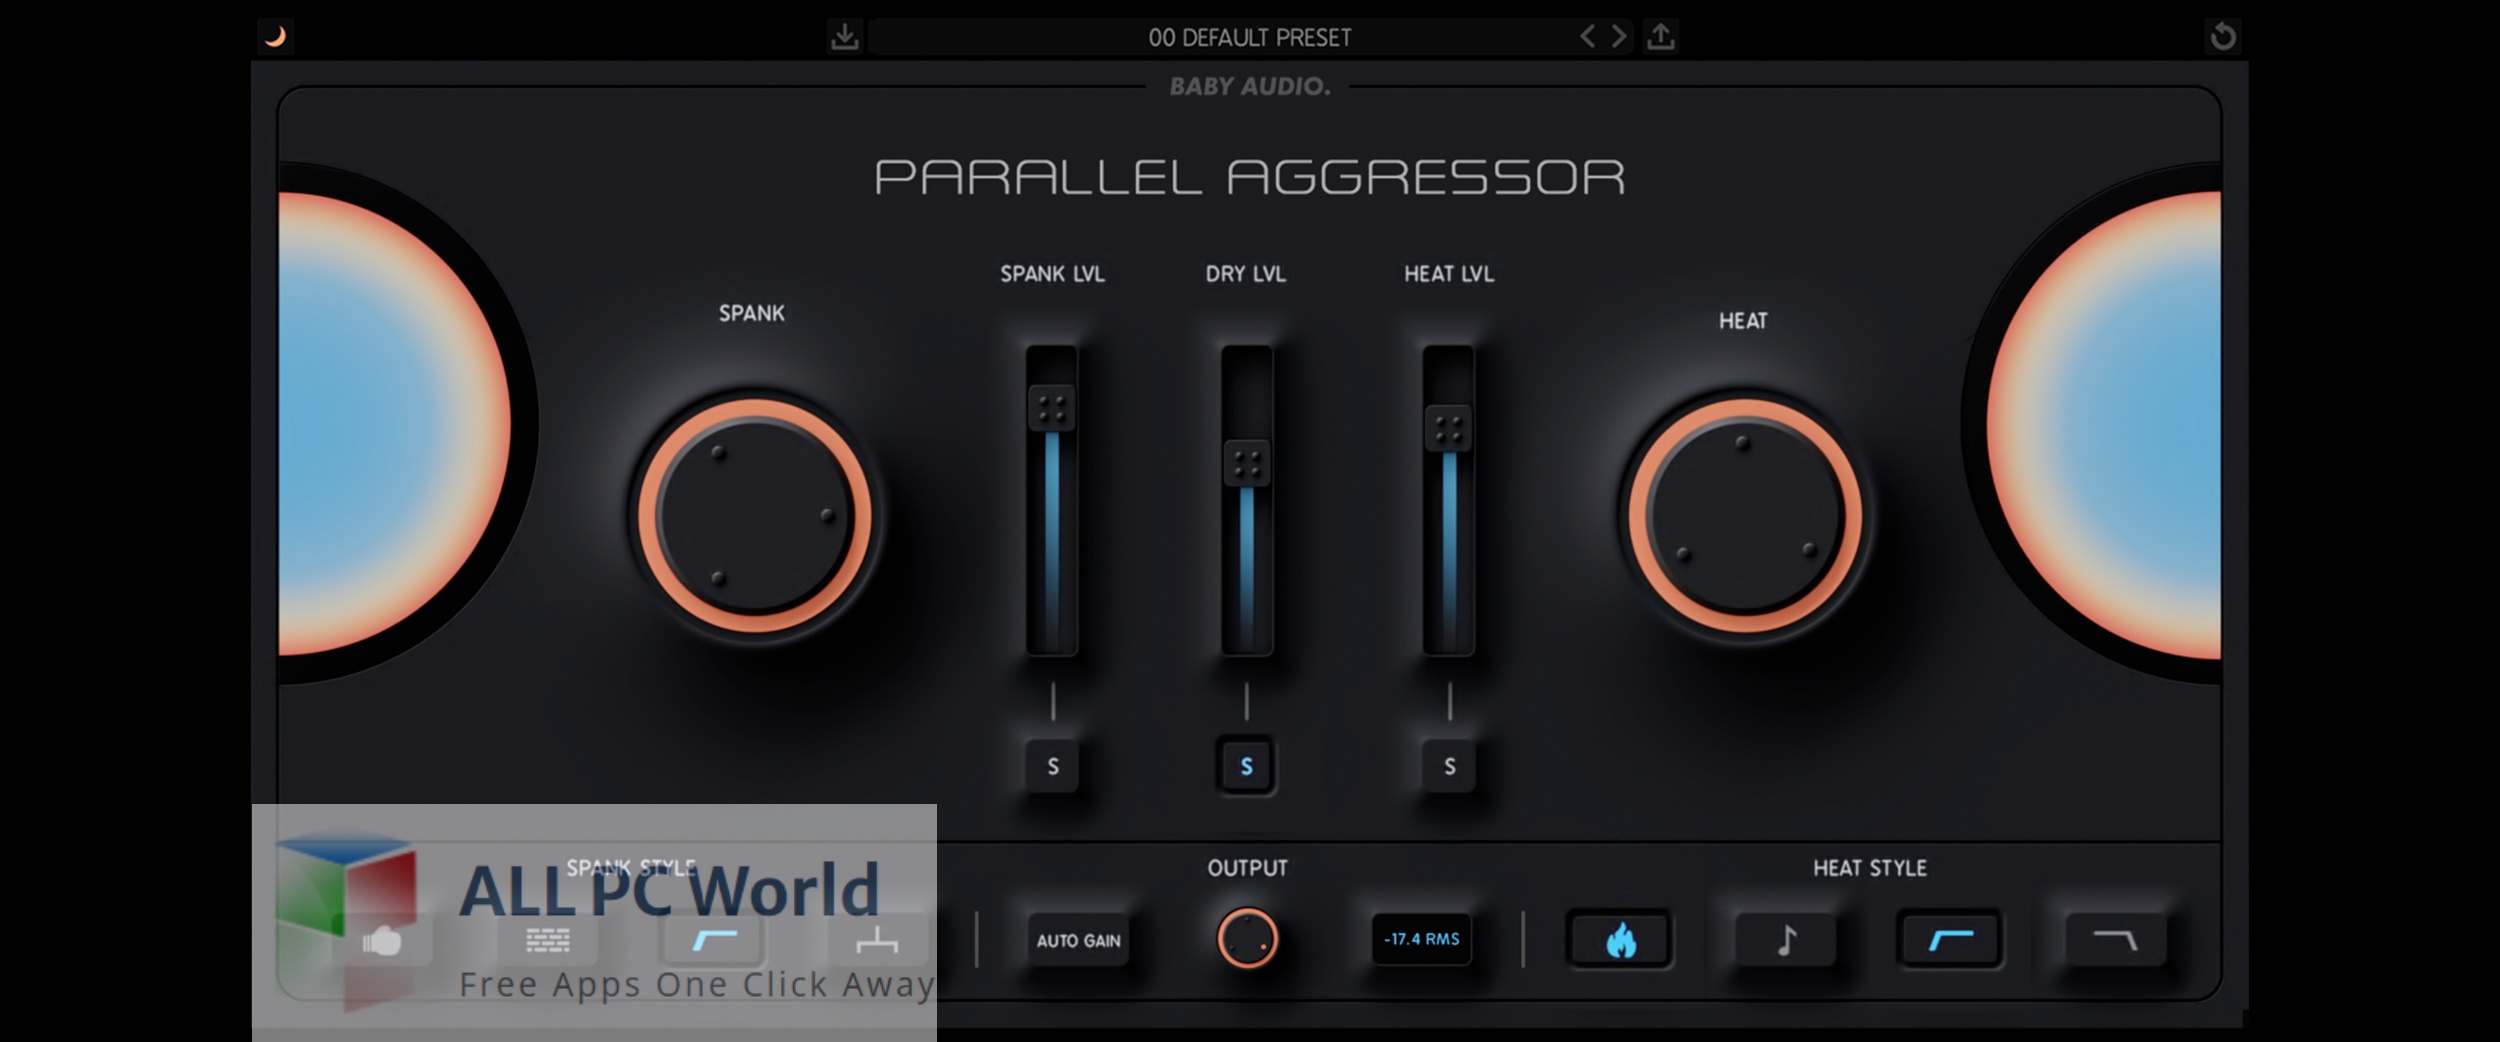 Baby Audio Parallel Aggressor Free Download